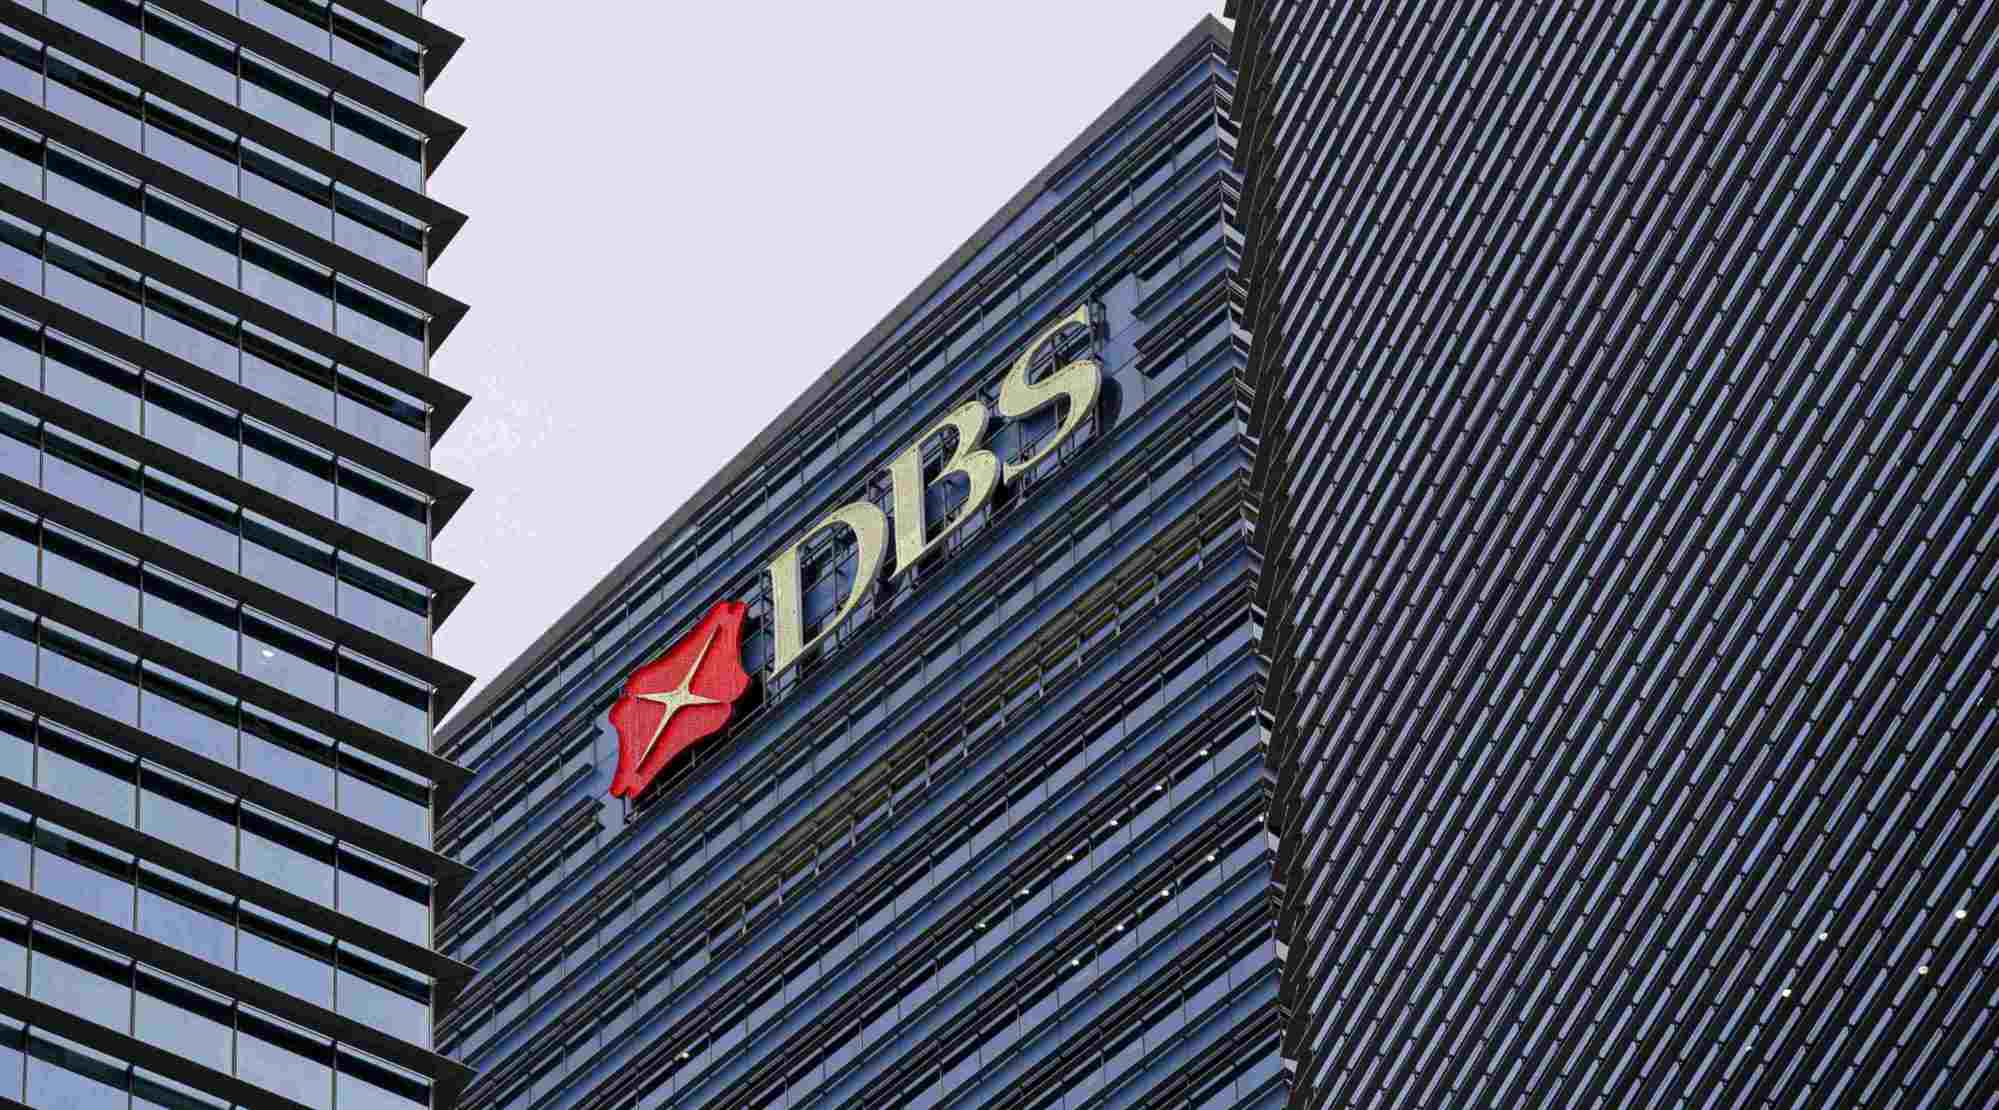 DBS, POSB internet banking services down for some, two days after MAS’s suspension was lifted